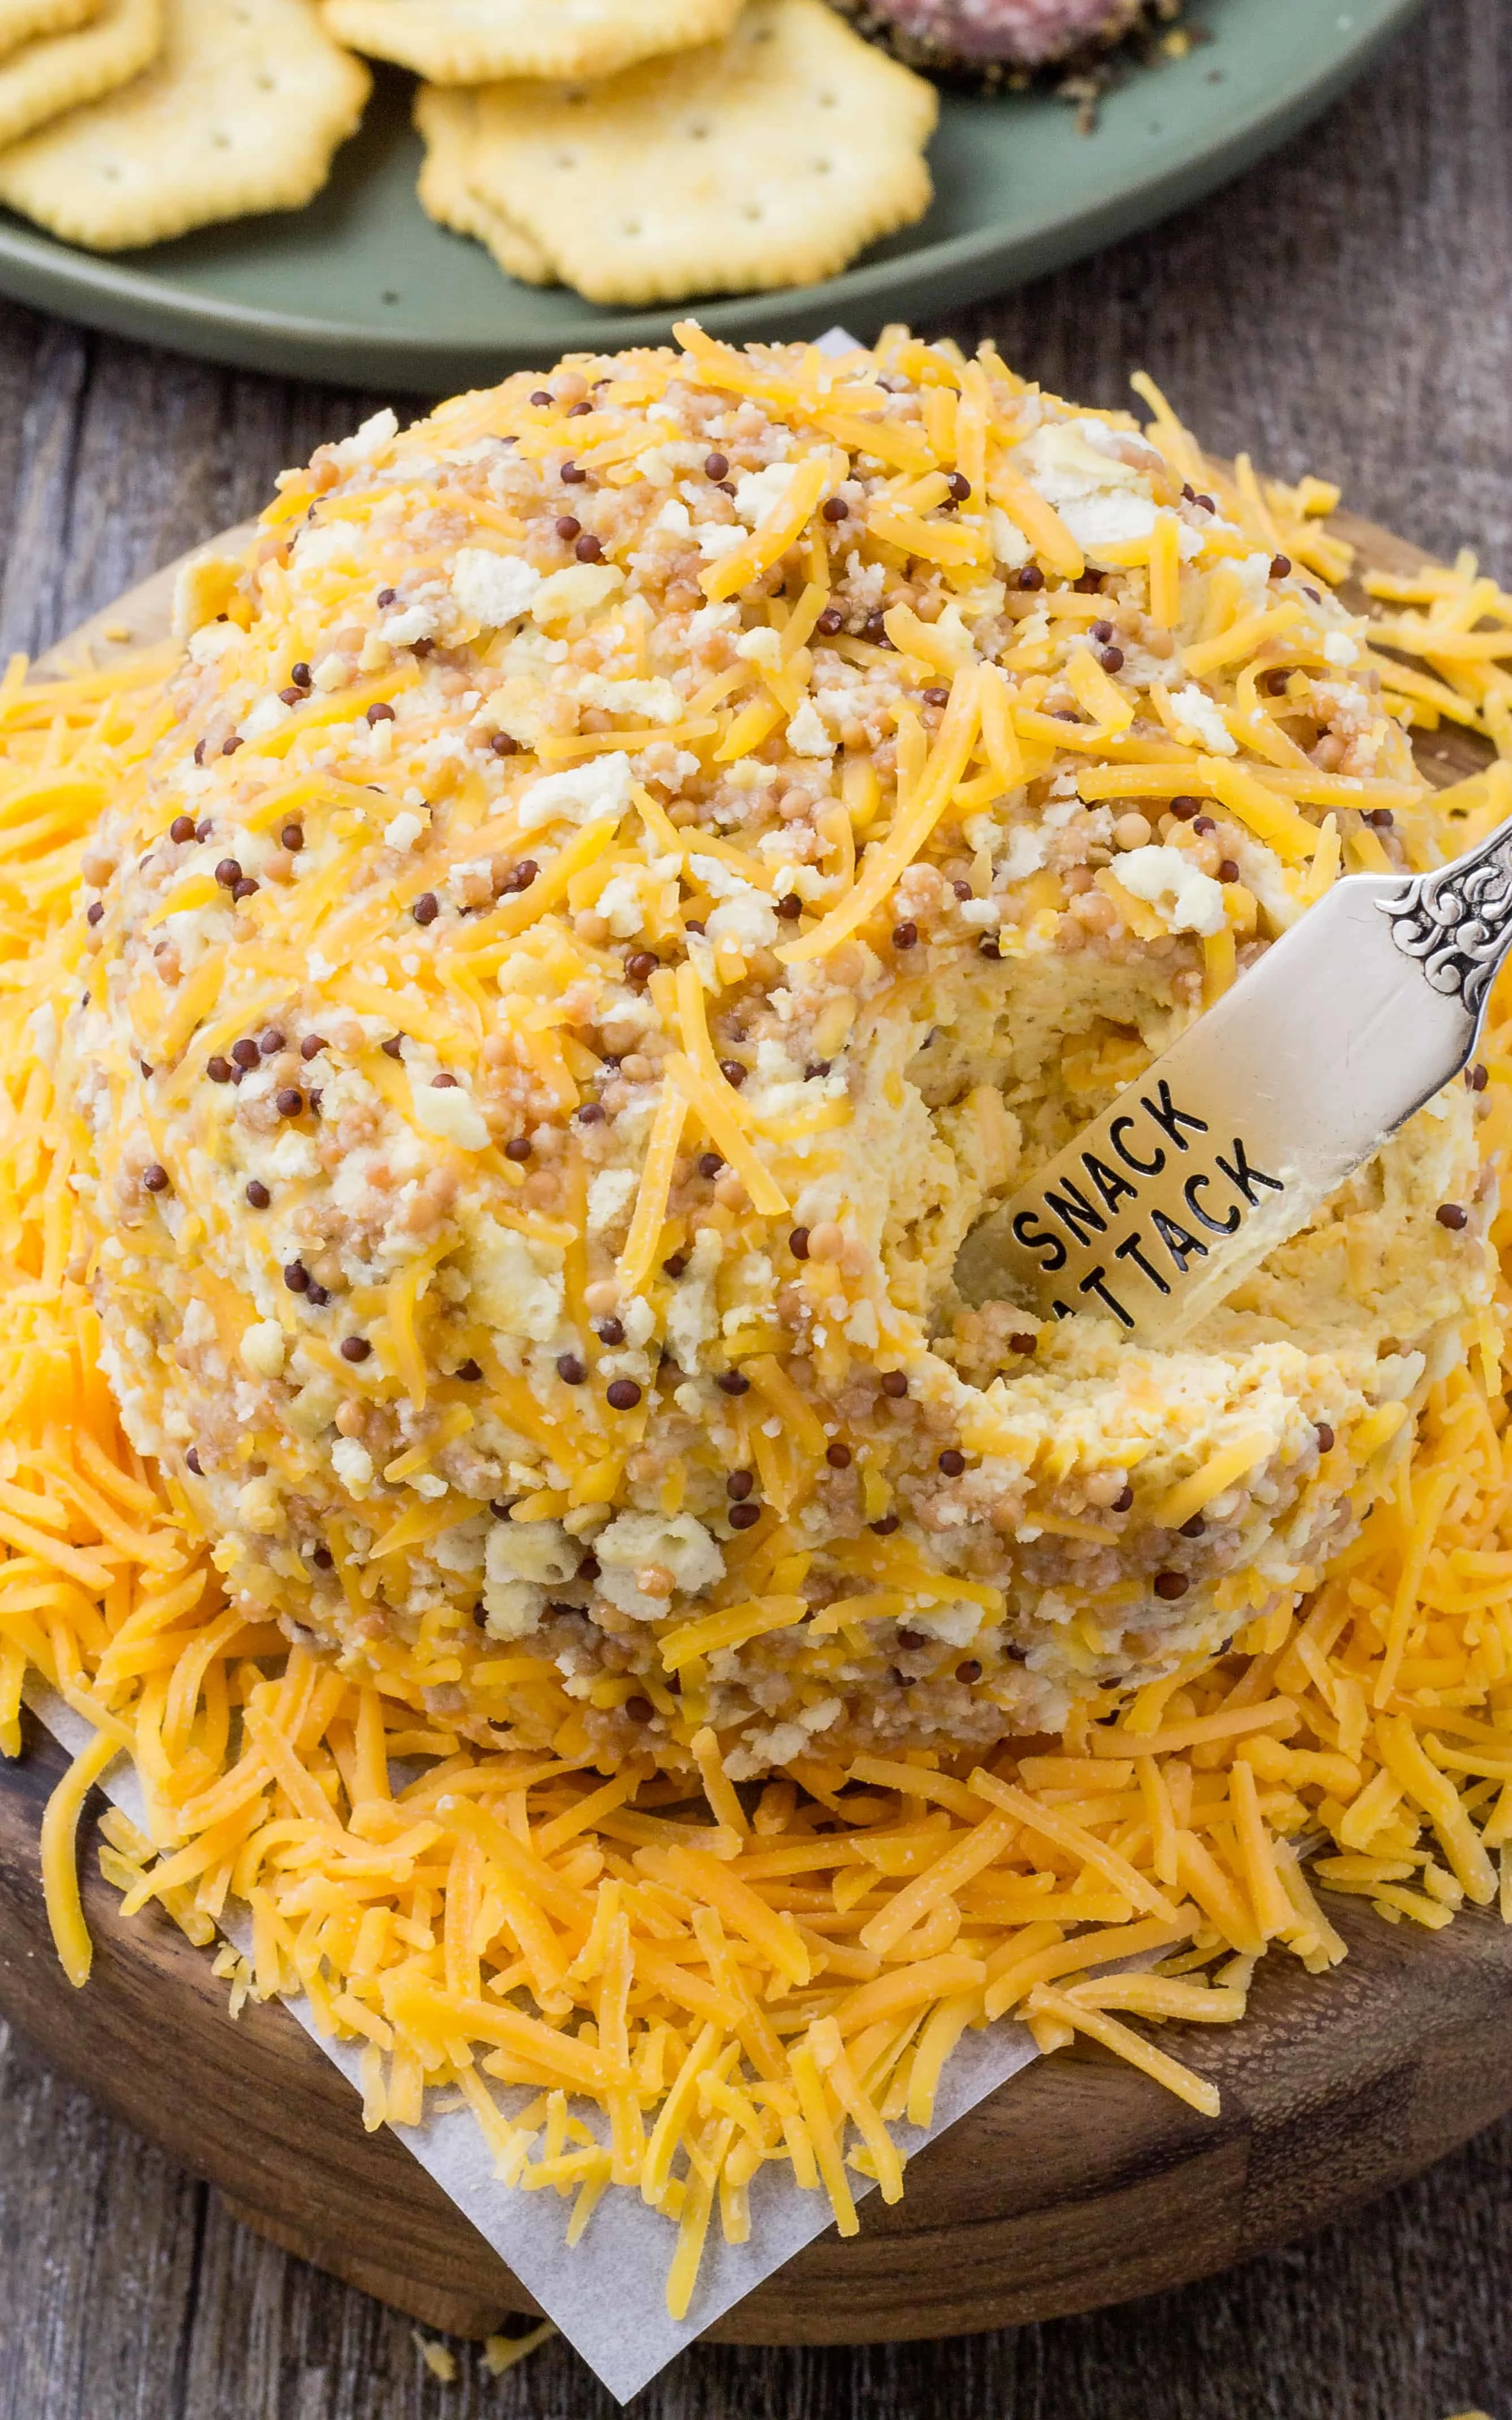 Honey Mustard Cheese Ball - Perfect for Parties | Take Two Tapas | #HoneyMustard #CheeseBall #Cheddar #Holidays #PartyFoods